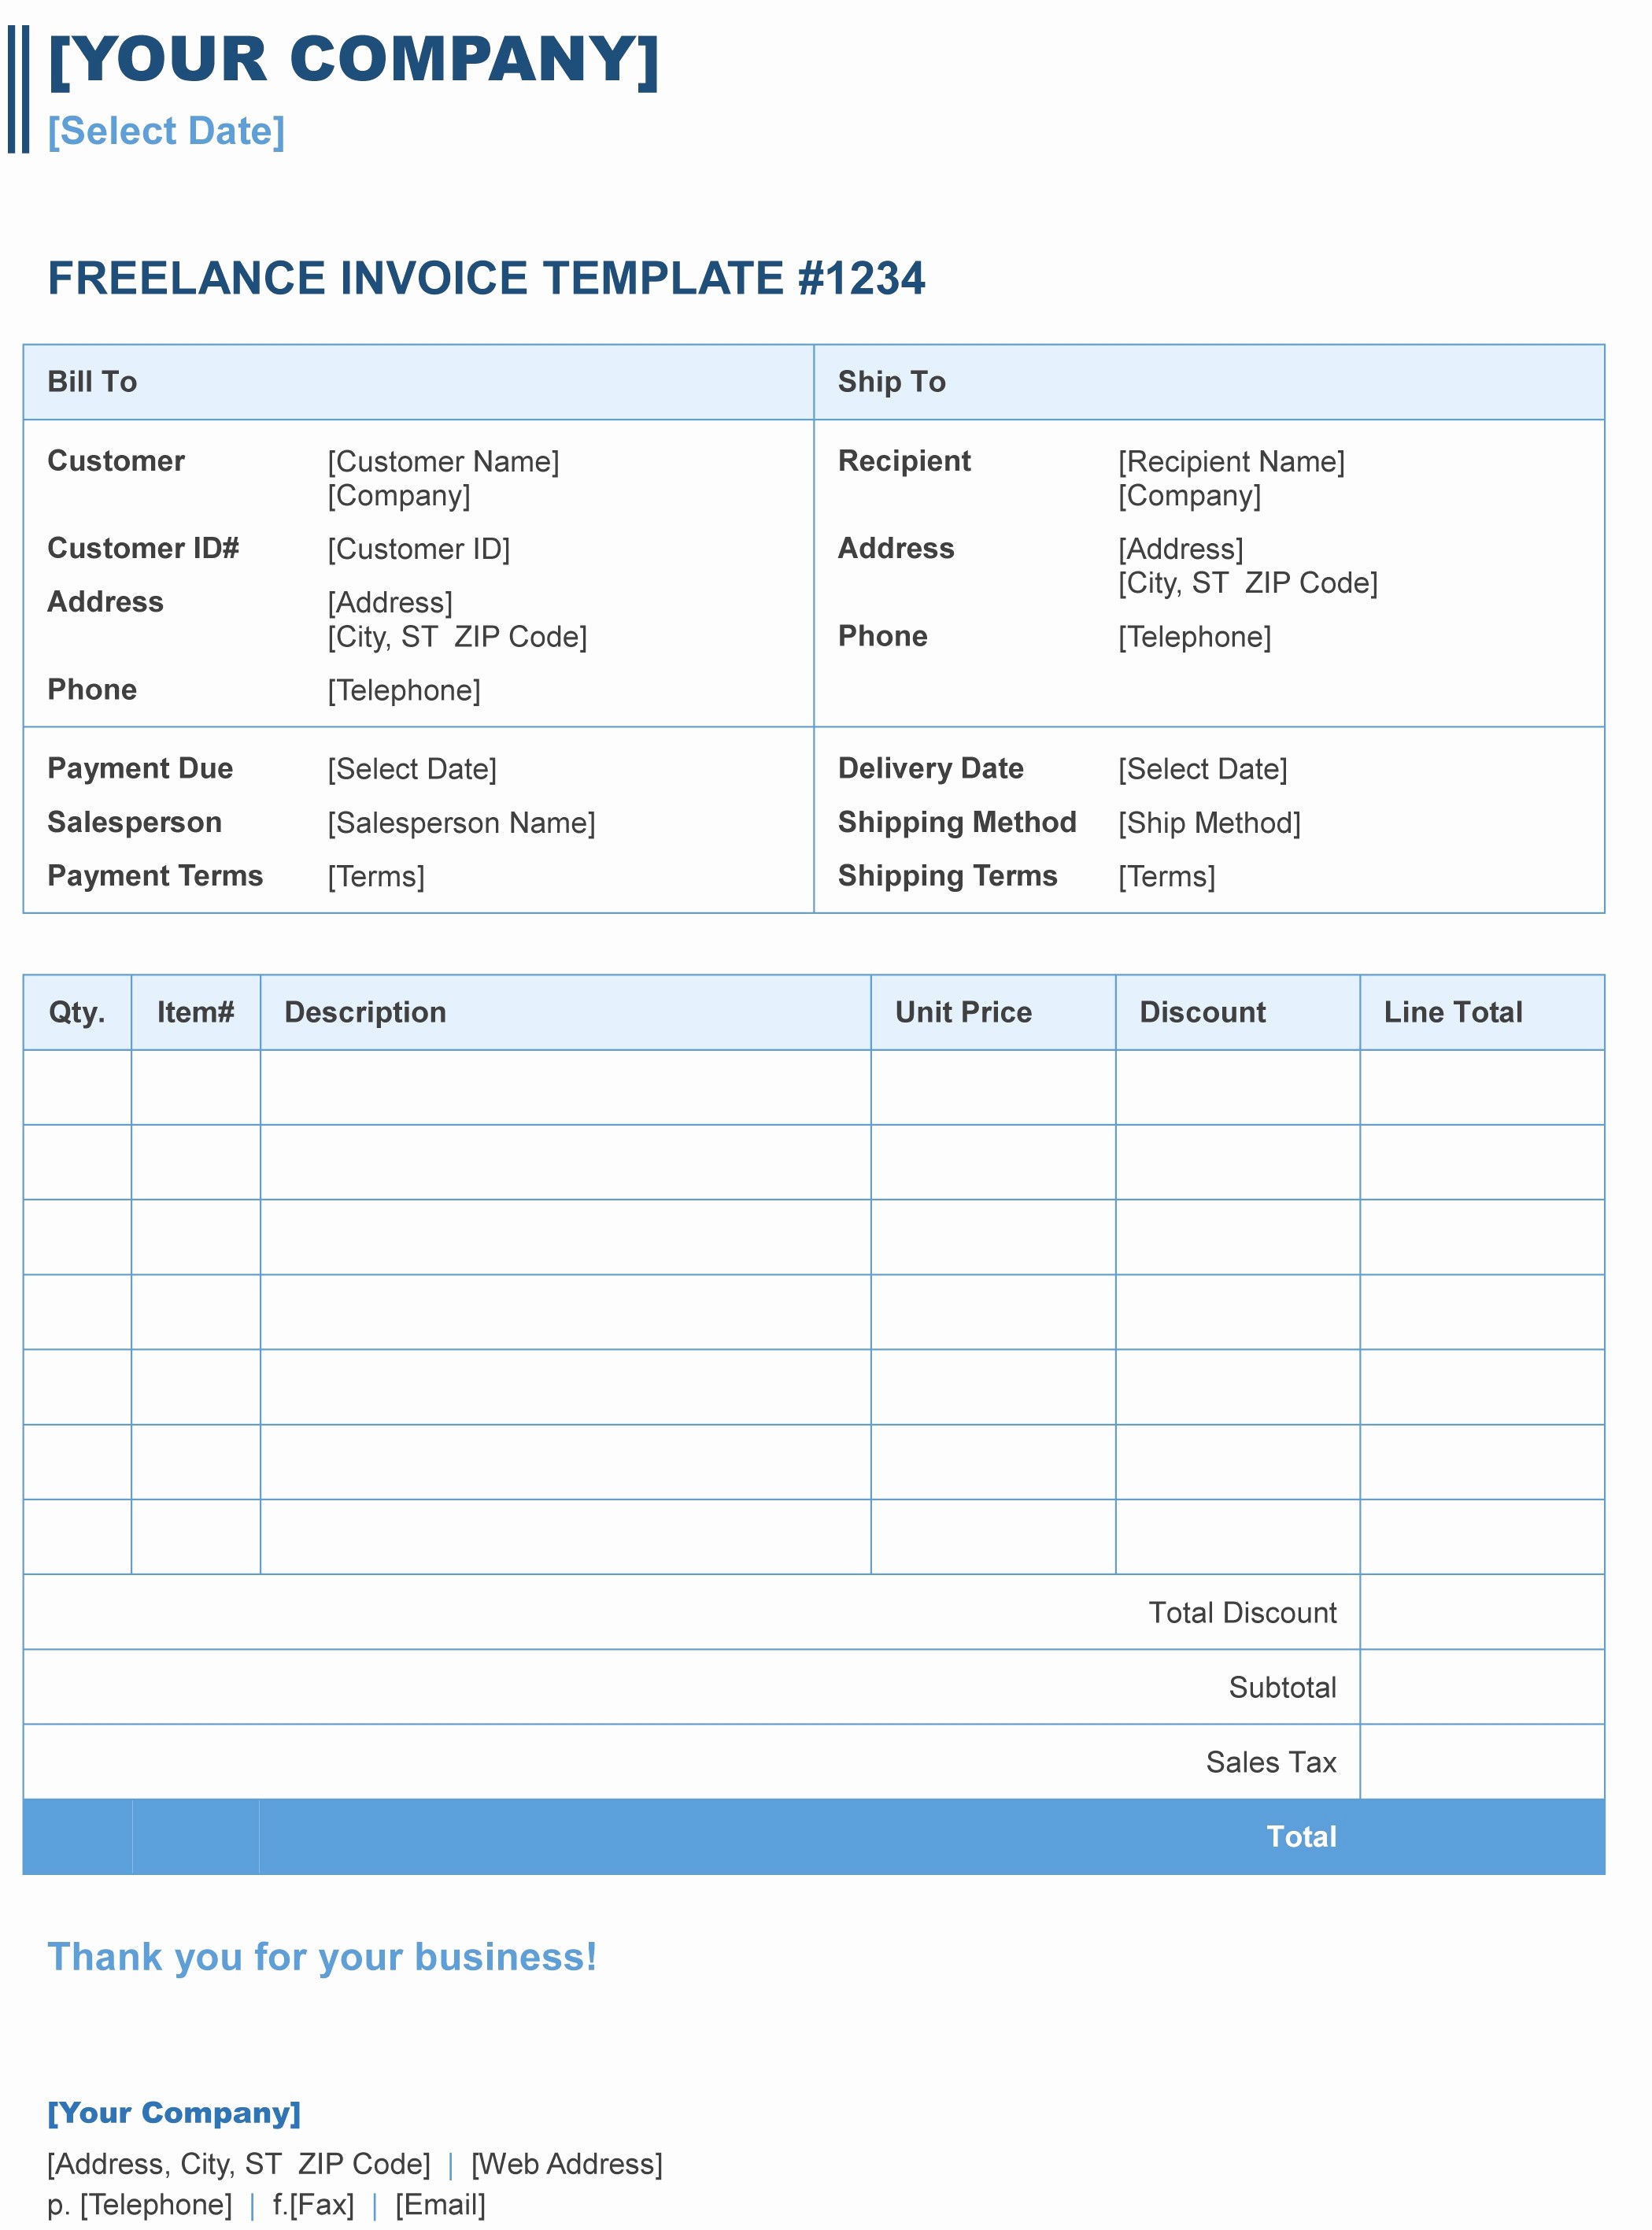 Free Invoice Template for Word Beautiful Freelance Invoice Template Excel